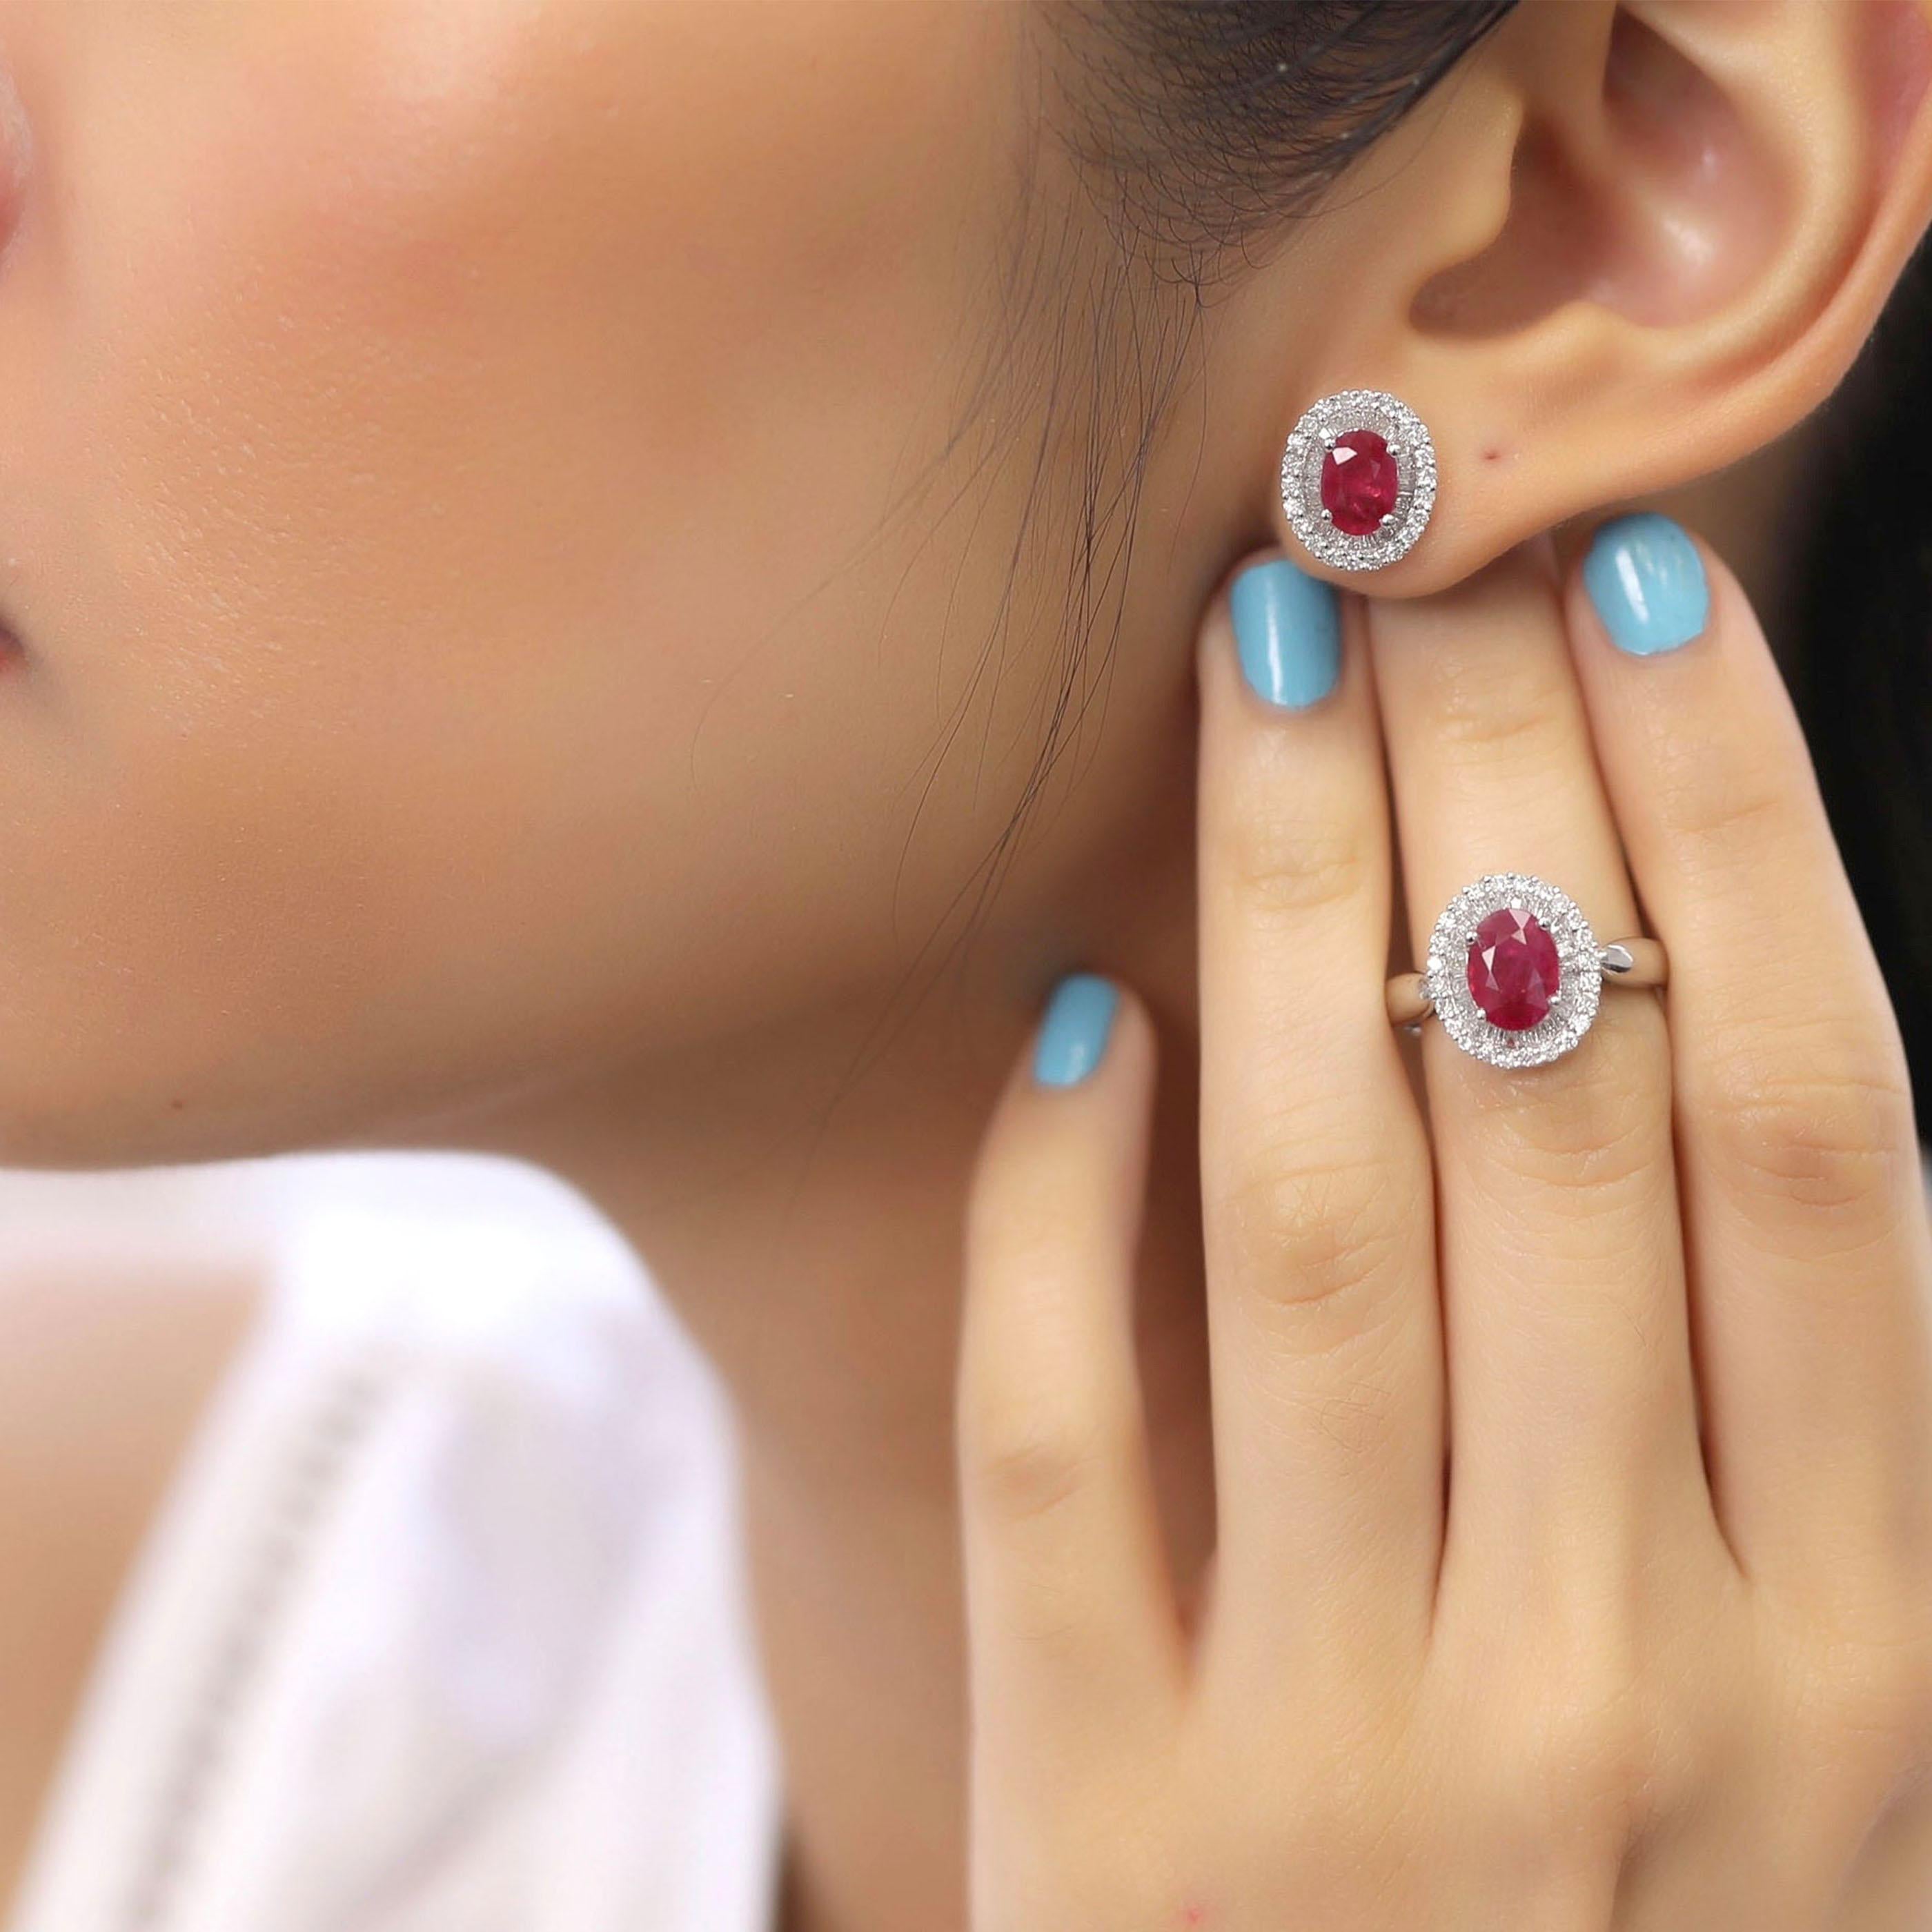 This small ruby earring and ring set is crafted in 18-karat white gold, weighing approximately 1.16 total carats of SI-H Quality white diamonds and 3.46 total carats of ruby stones. The ring is comfortable and can be sized 